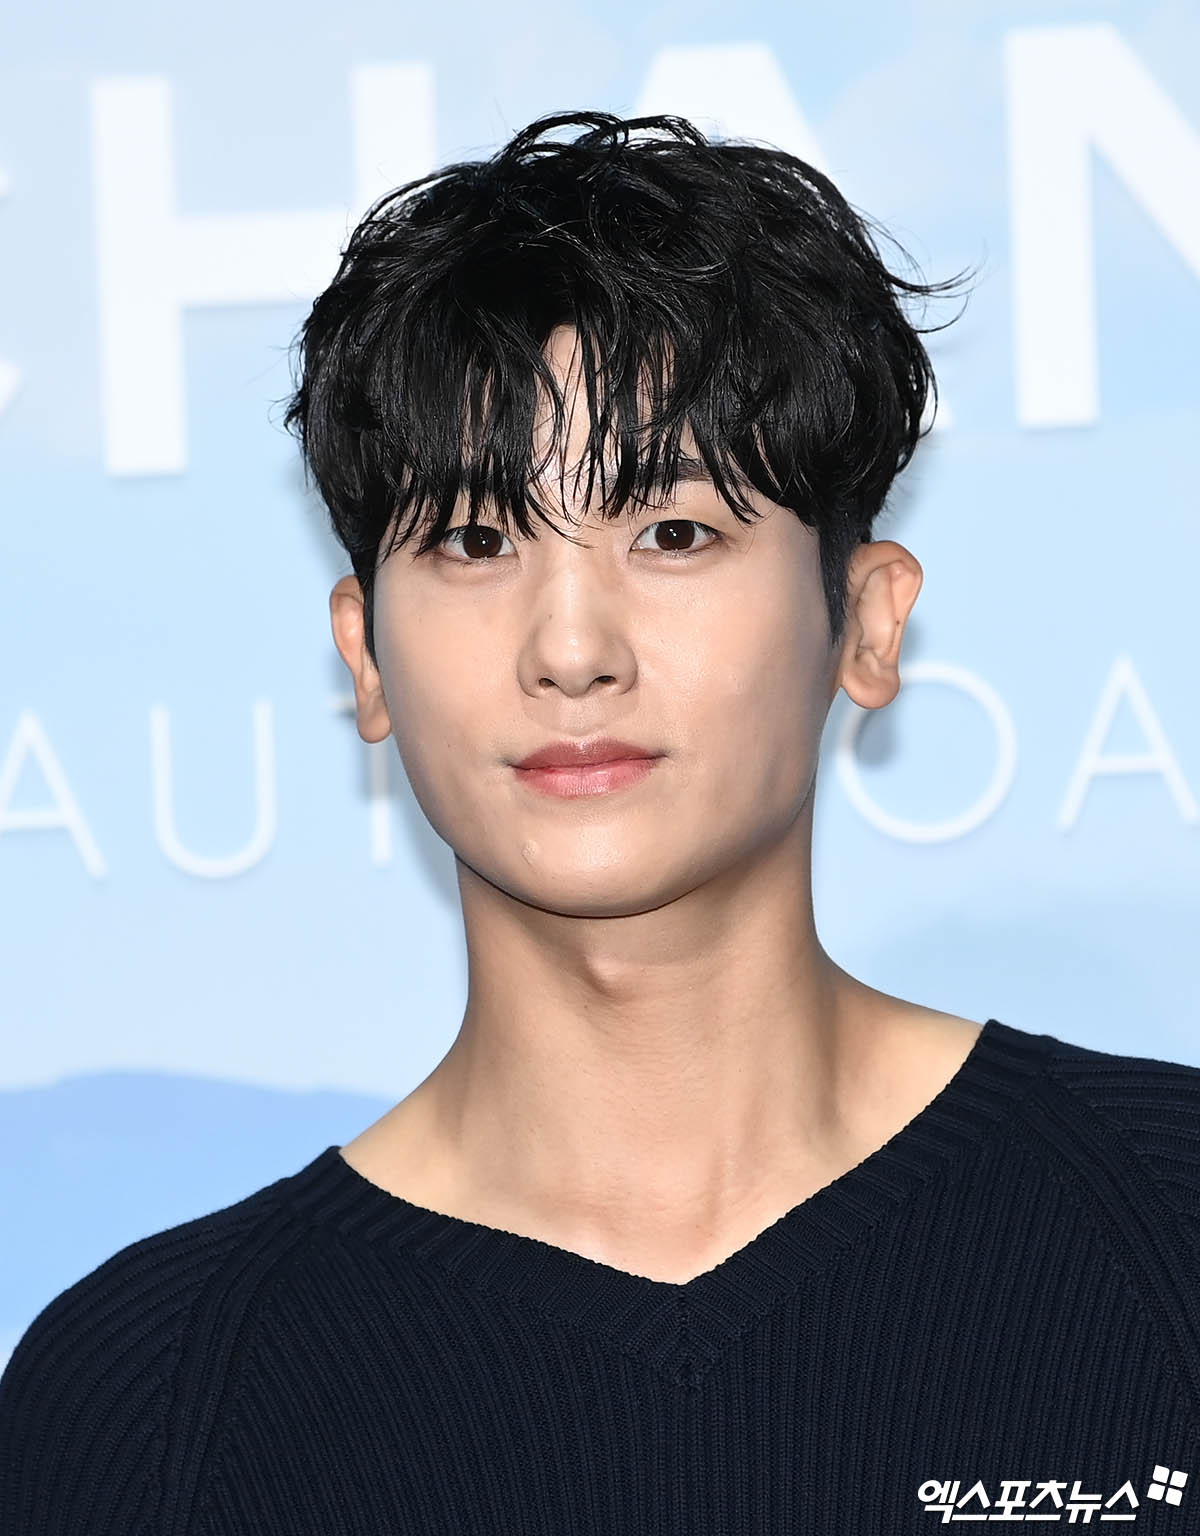 PCAVENGERS OFFICIAL on Twitter Press photos of Park Hyung Sik attending  the opening ceremony of the new CHANEL studio collection at Seongsudong  Seoul ParkHyungSik 박형식 CHANEL CHANELKOREA  Dispatch Korea  httpstcoYxyJ7YI1bi 